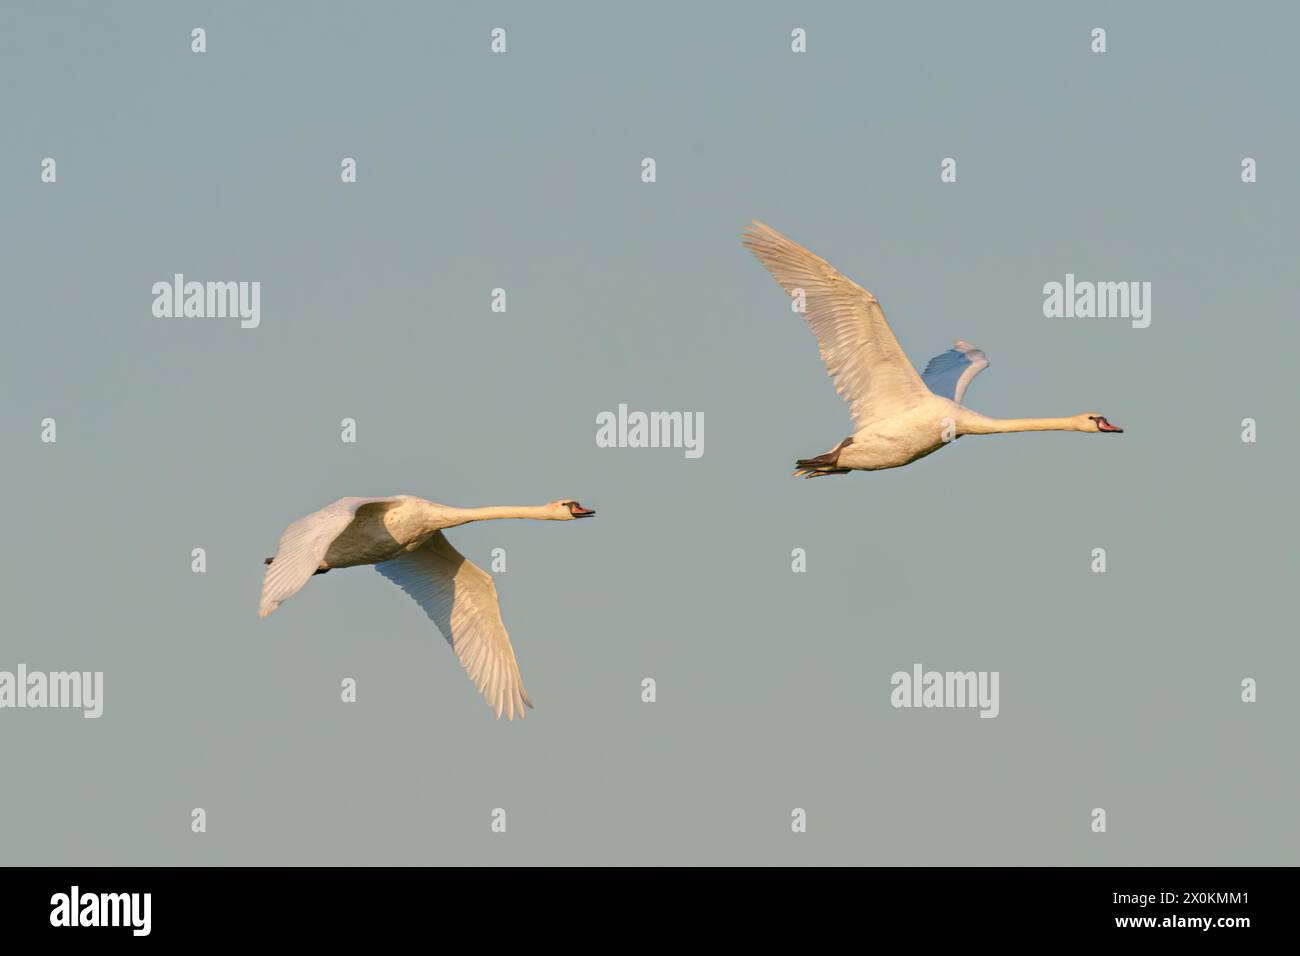 Two graceful swans soaring through the azure sky, displaying their majestic wings and elegant feathers as they embark on their animal migration journe Stock Photo